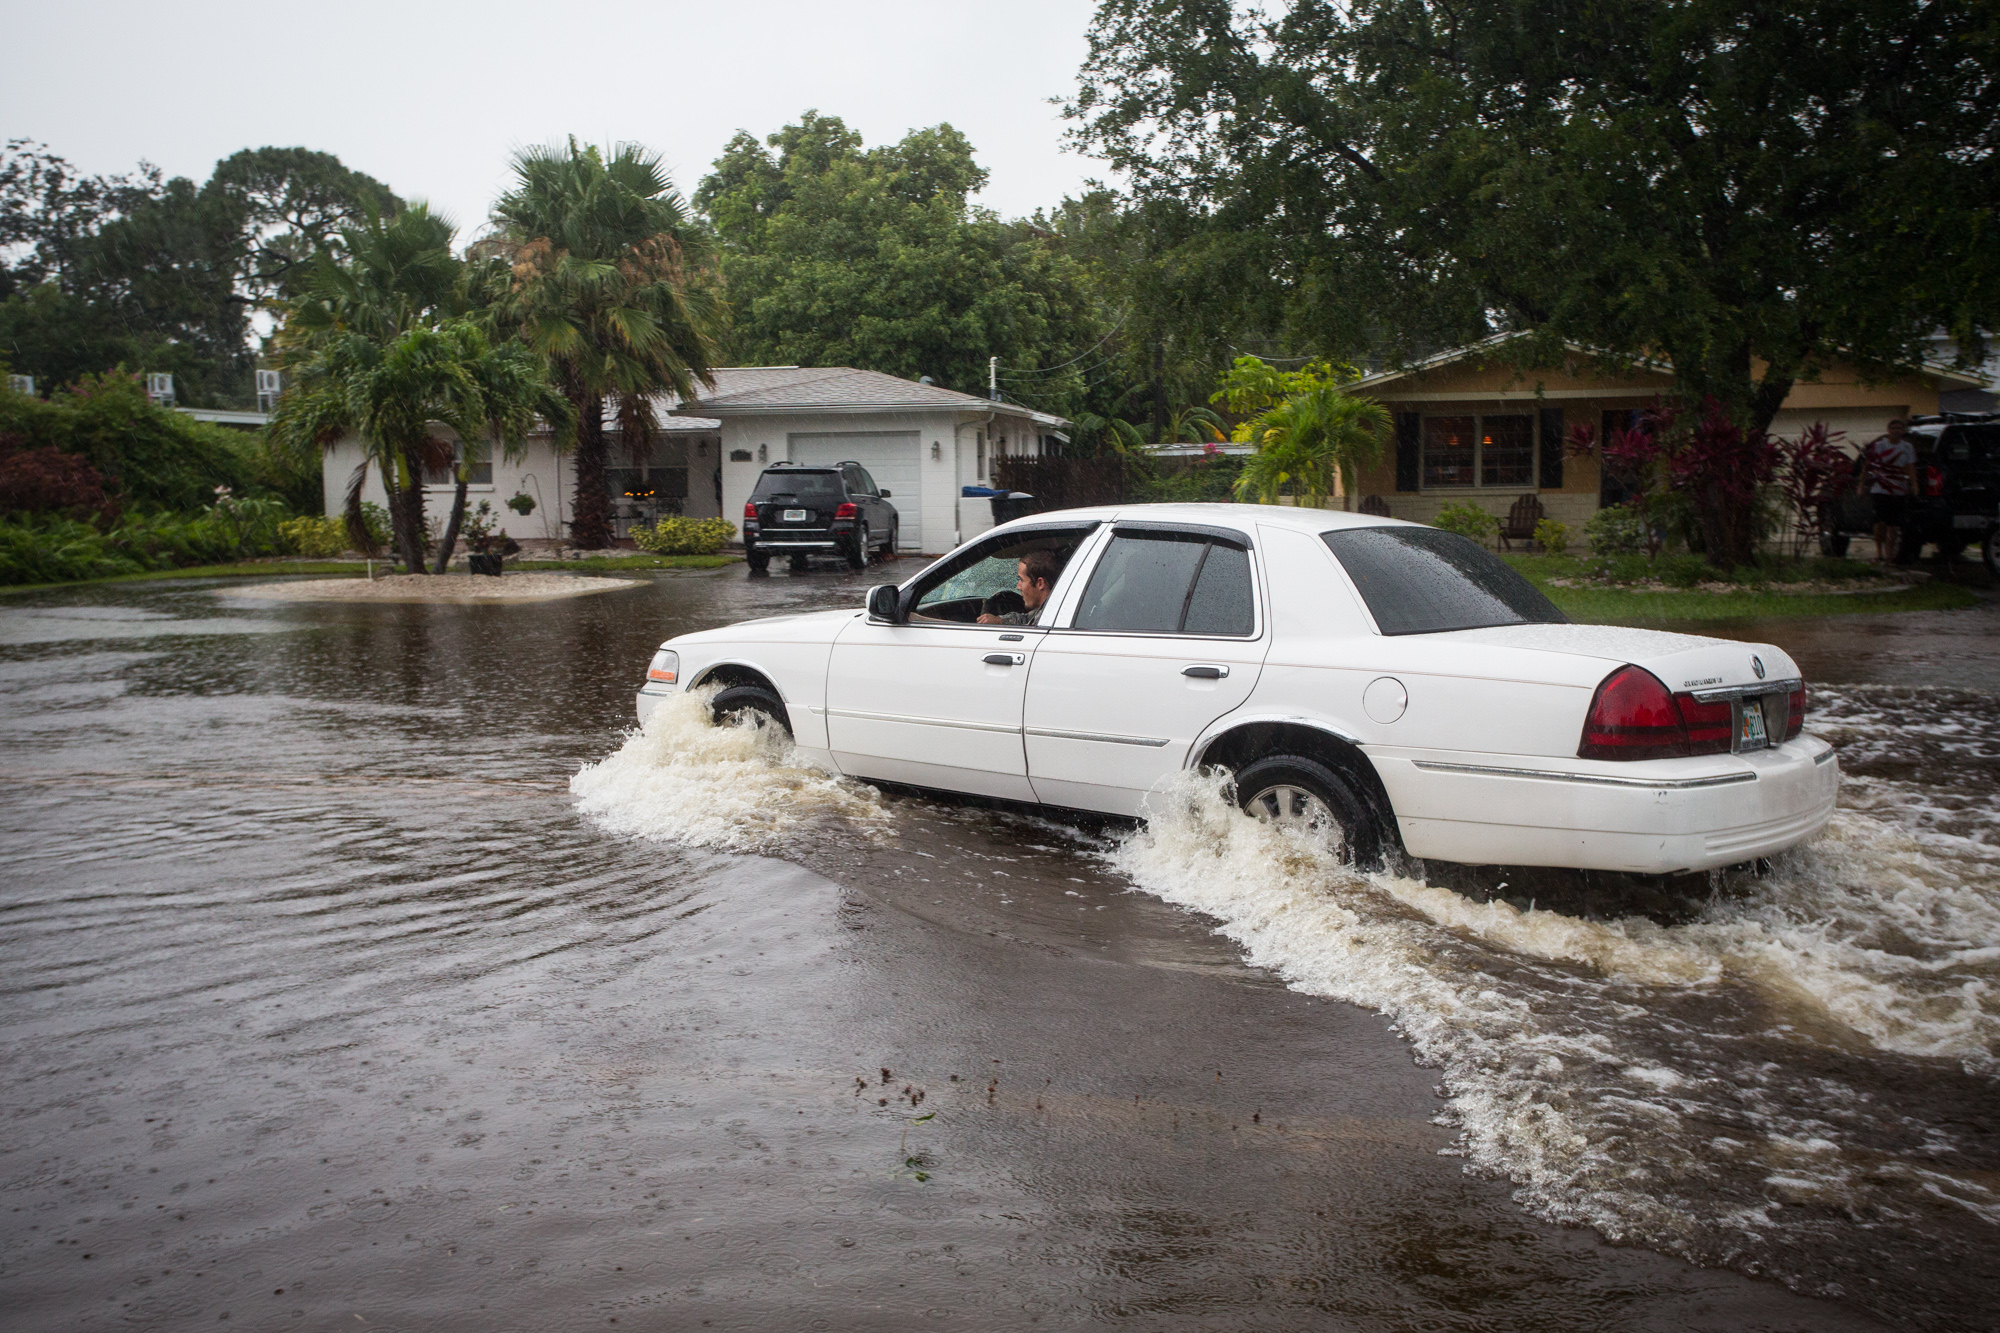 A motorist drives down a flooded street in St. Petersburg, Fla., after Tropical Storm Colin dumped heavy rains over the Tampa Bay area on June 7, 2016. (Loren Elliott—AP)